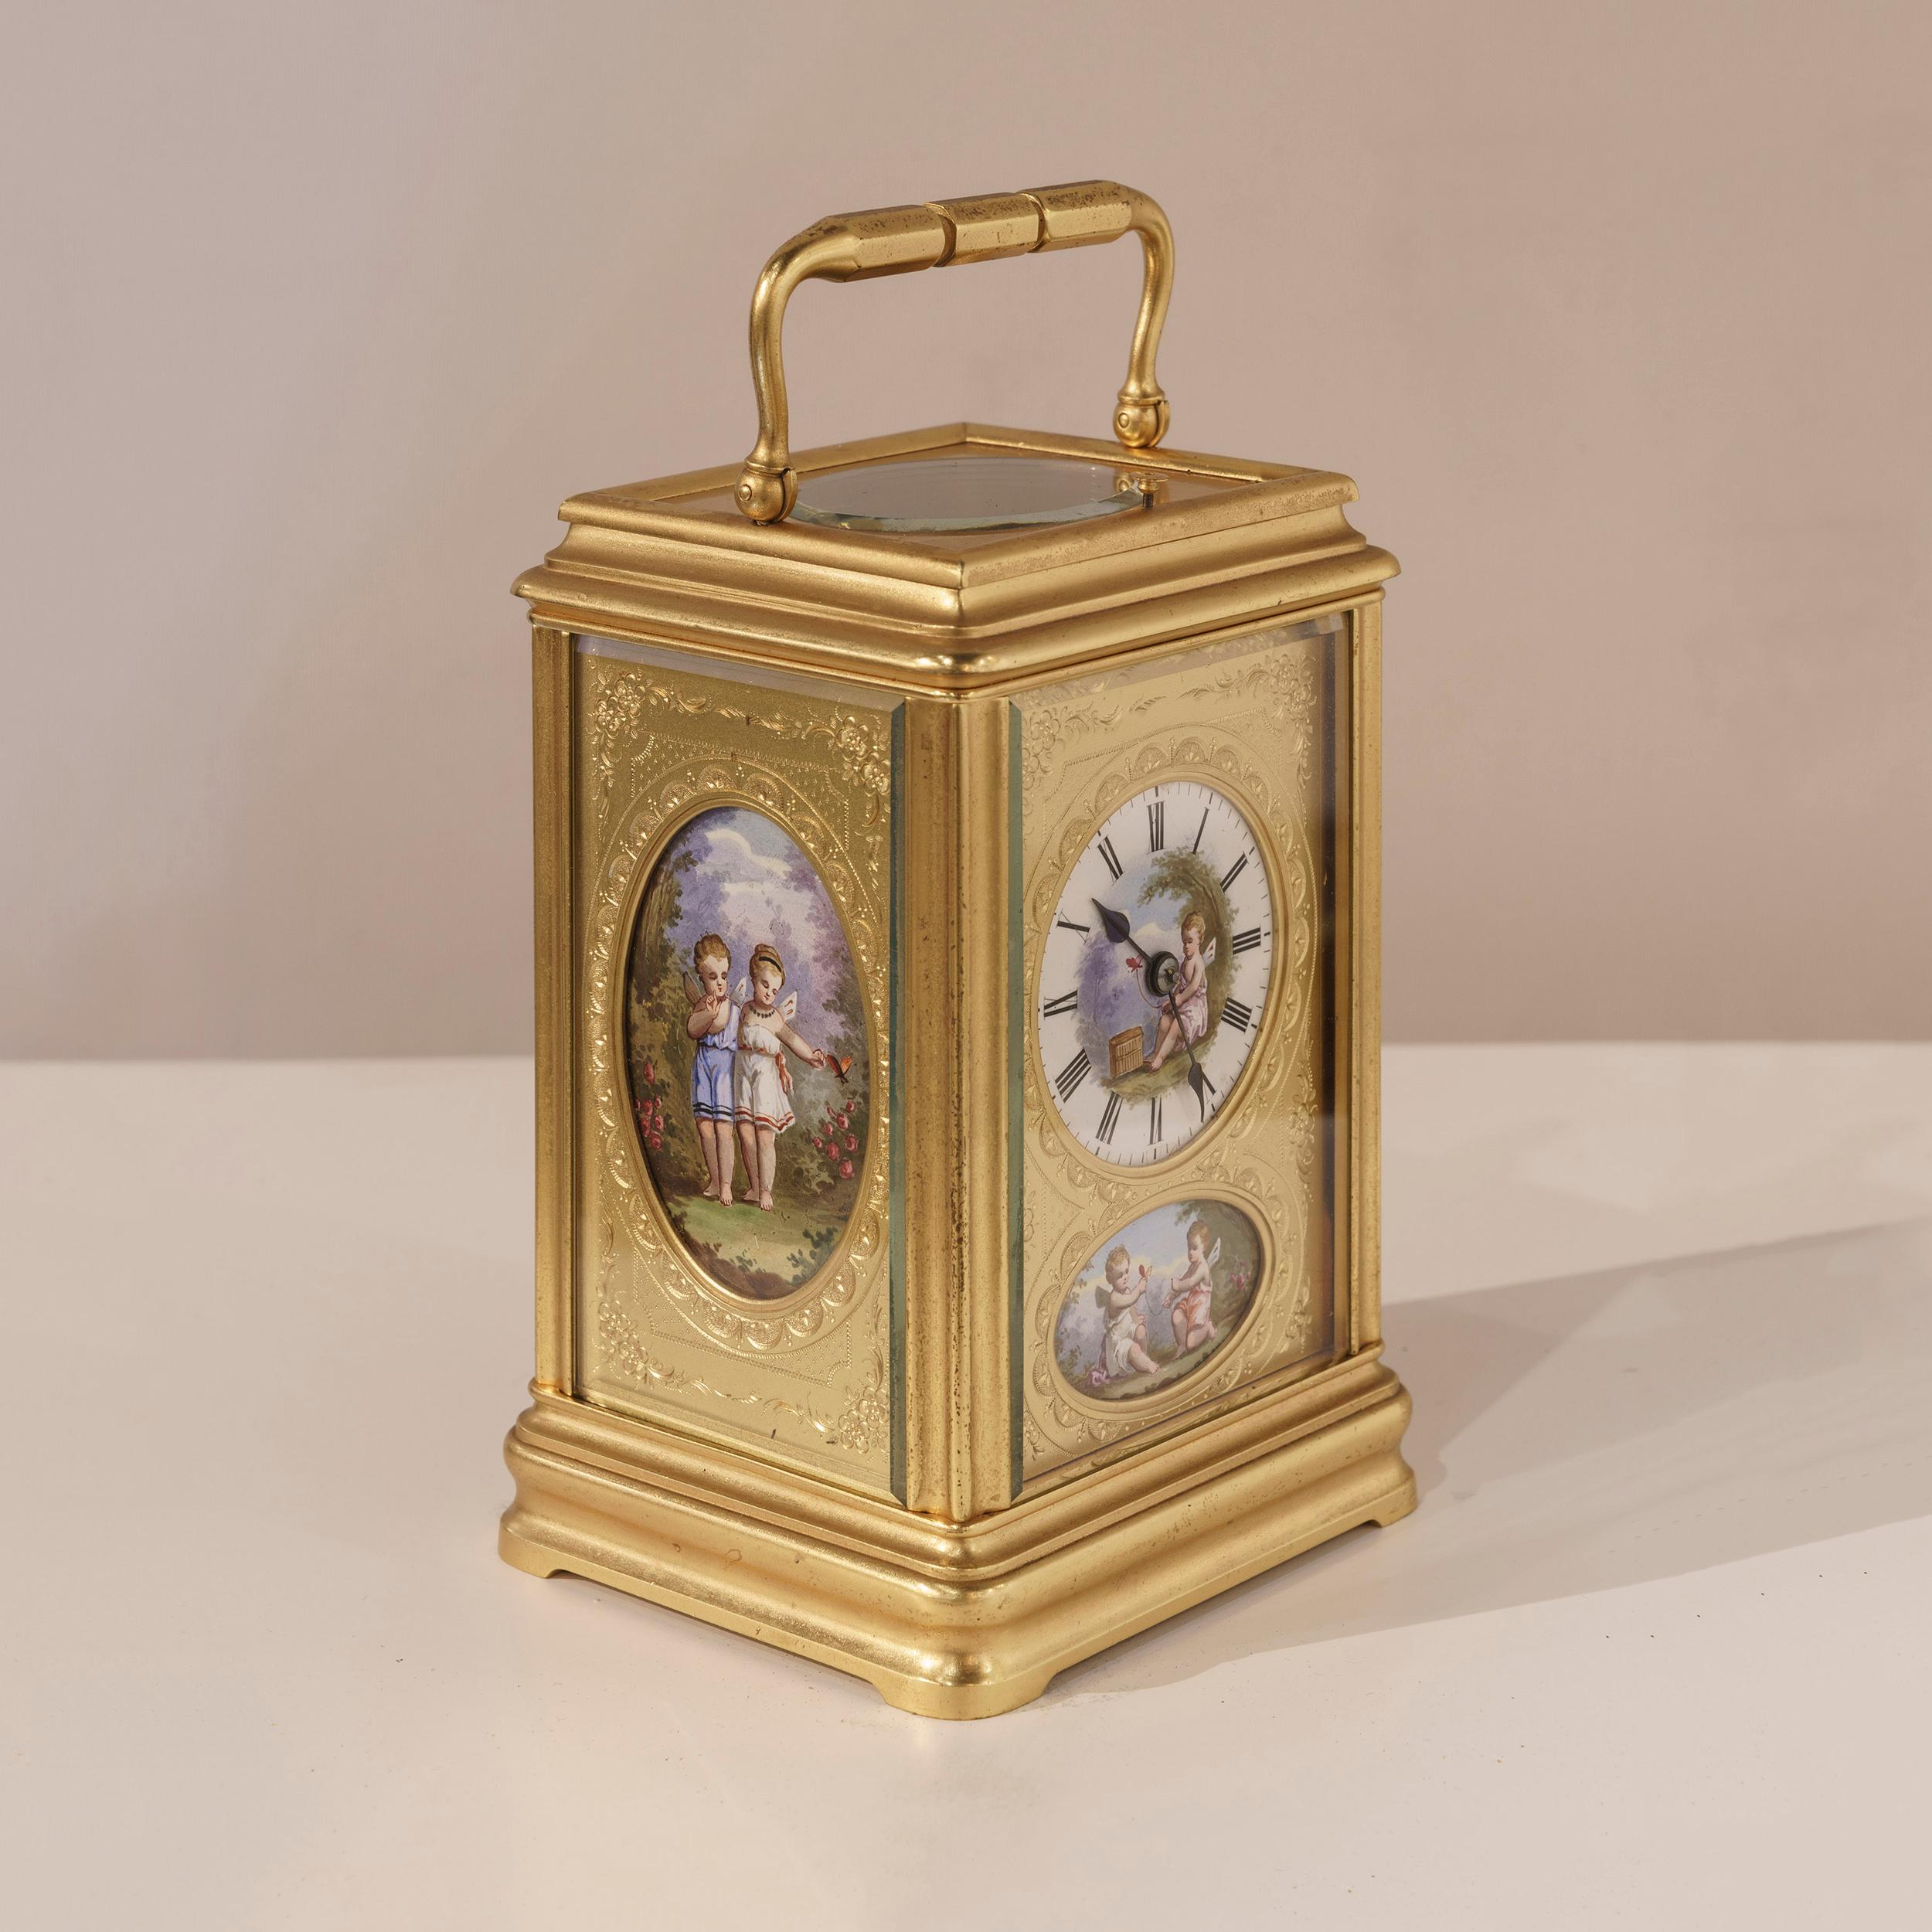 A fine carriage clock

The engraved gilt case rises from an ogee plinth, and is dressed with elliptical polychrome enameled plaques to the fascia and the sides, depicting children in a Romantic setting, with a carrying handle atop, set across the